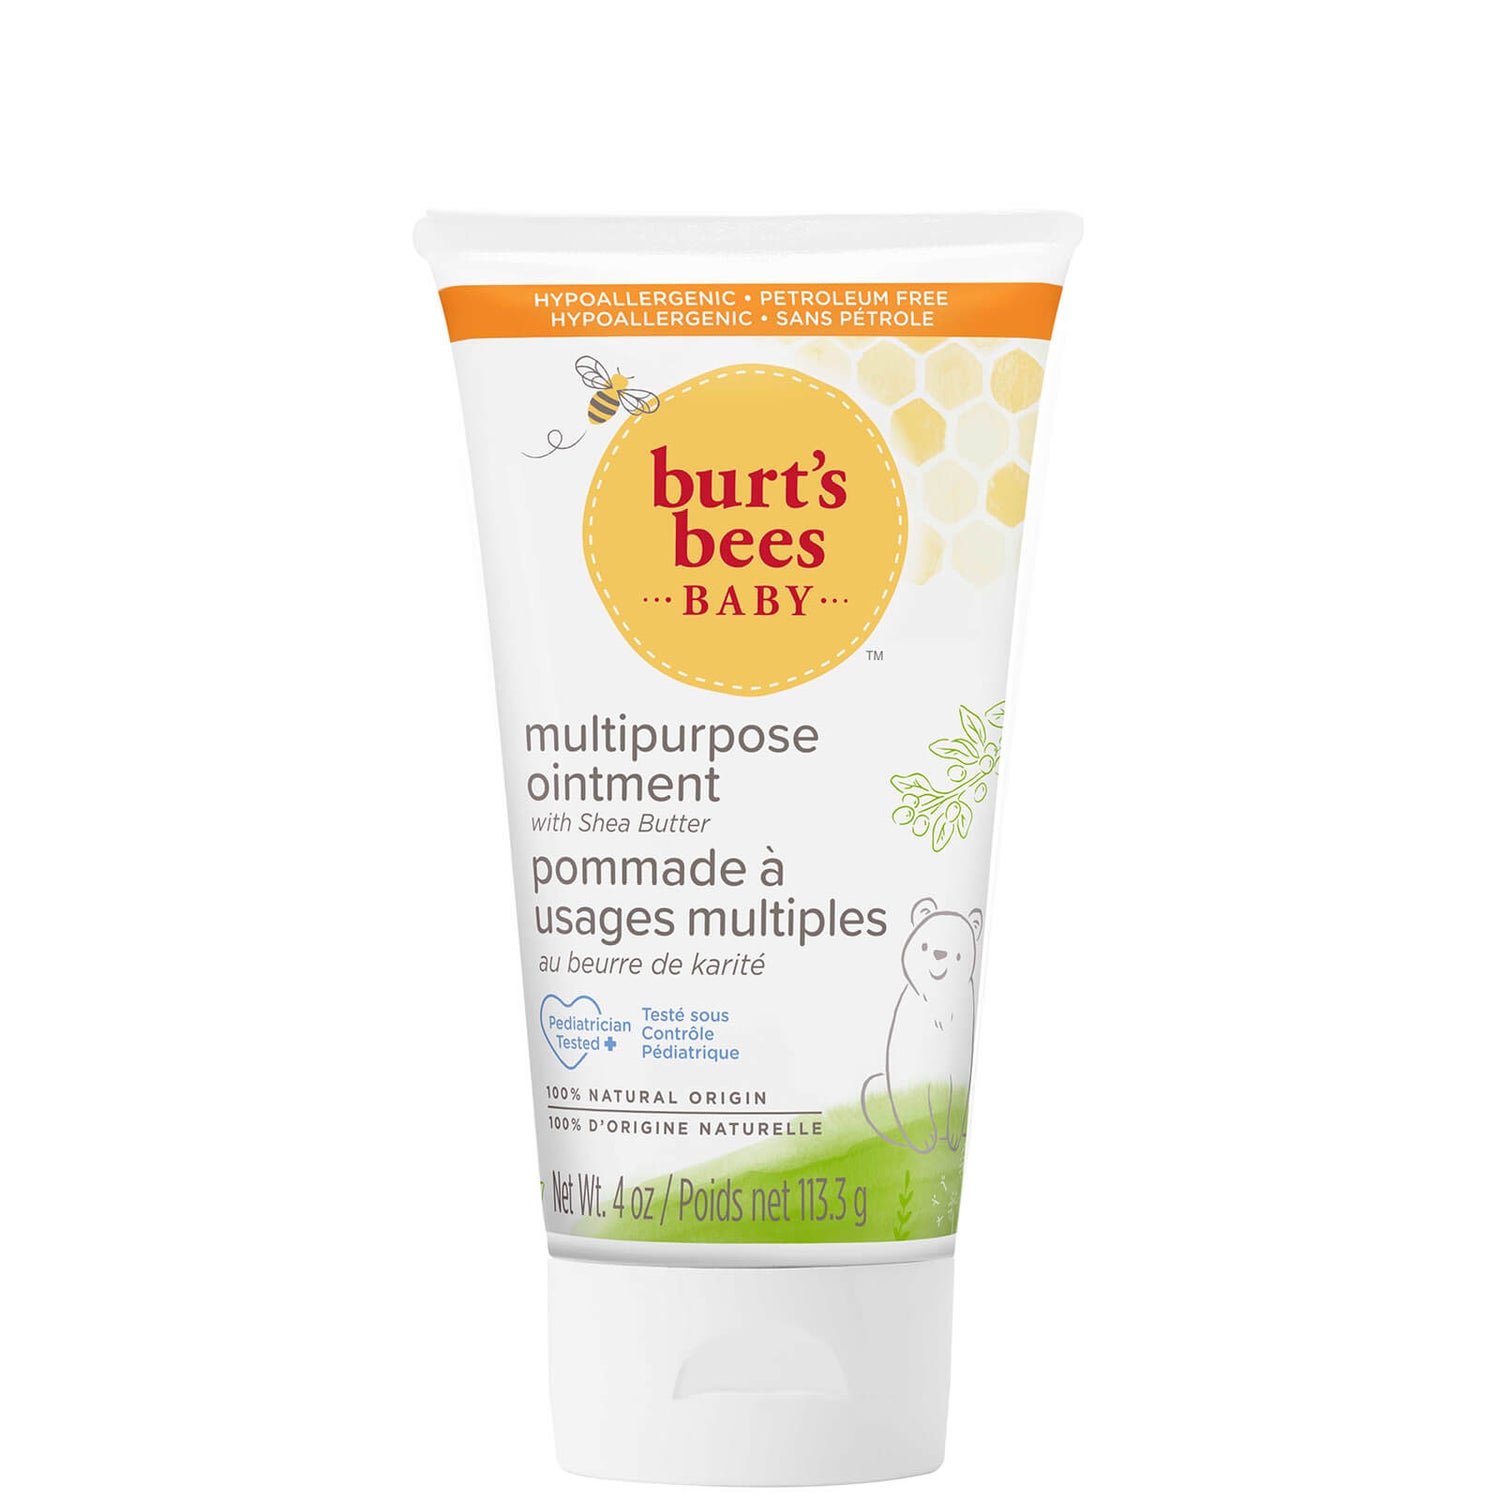 Burt's Bees Baby 100% Natural Multi Purpose Ointment